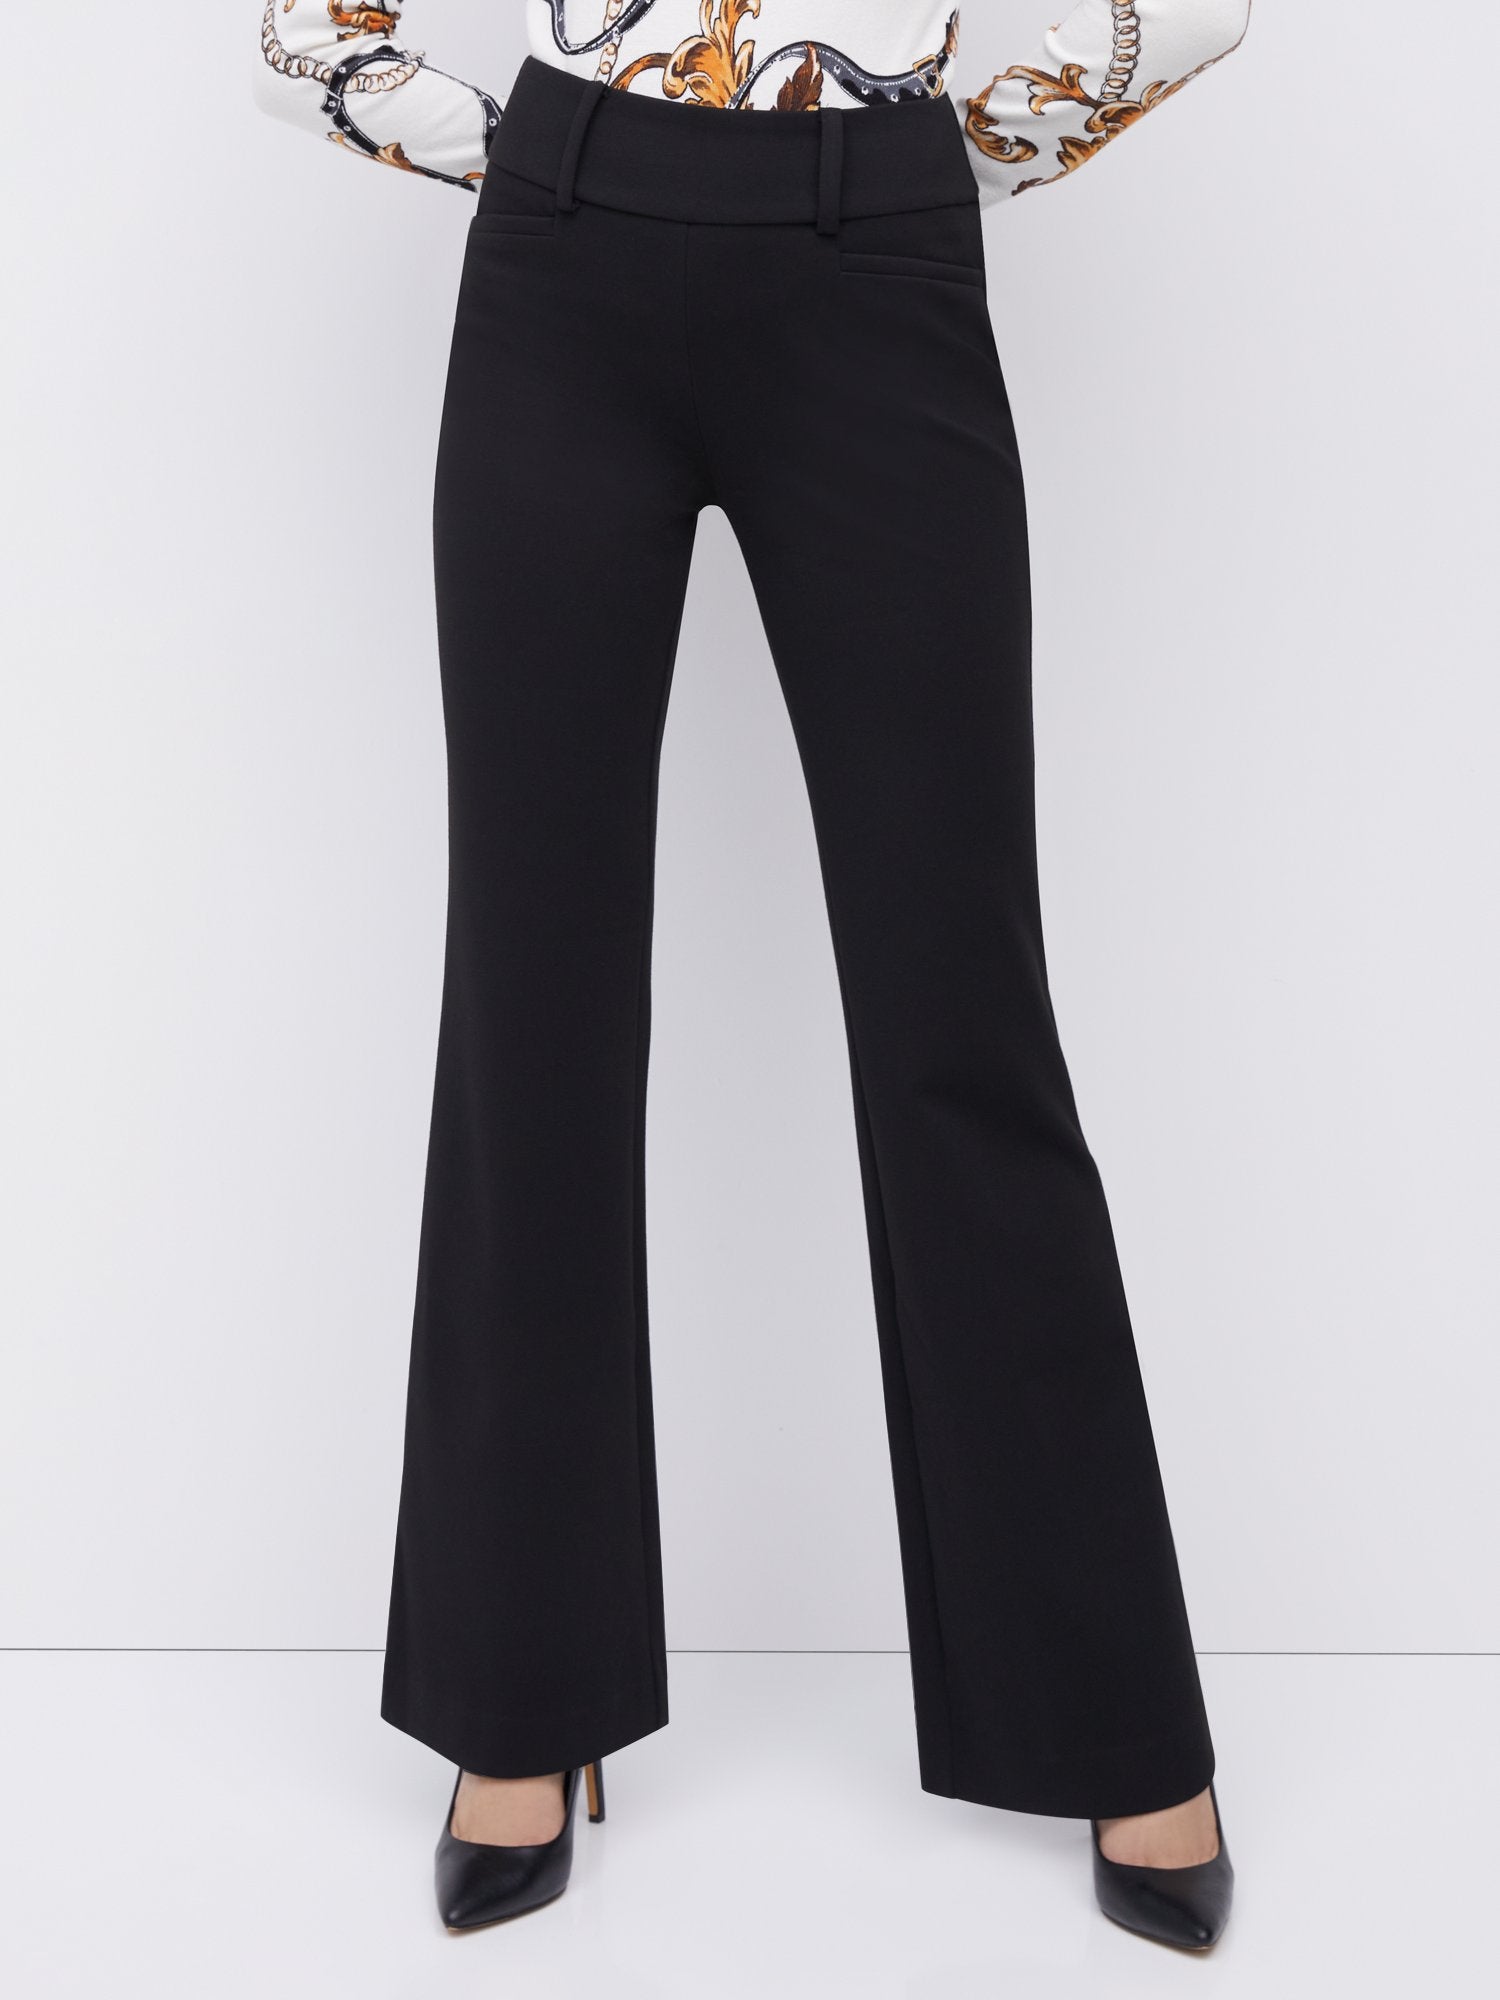 70s Black High Waisted Flared Pants - Petite Small, 26 – Flying